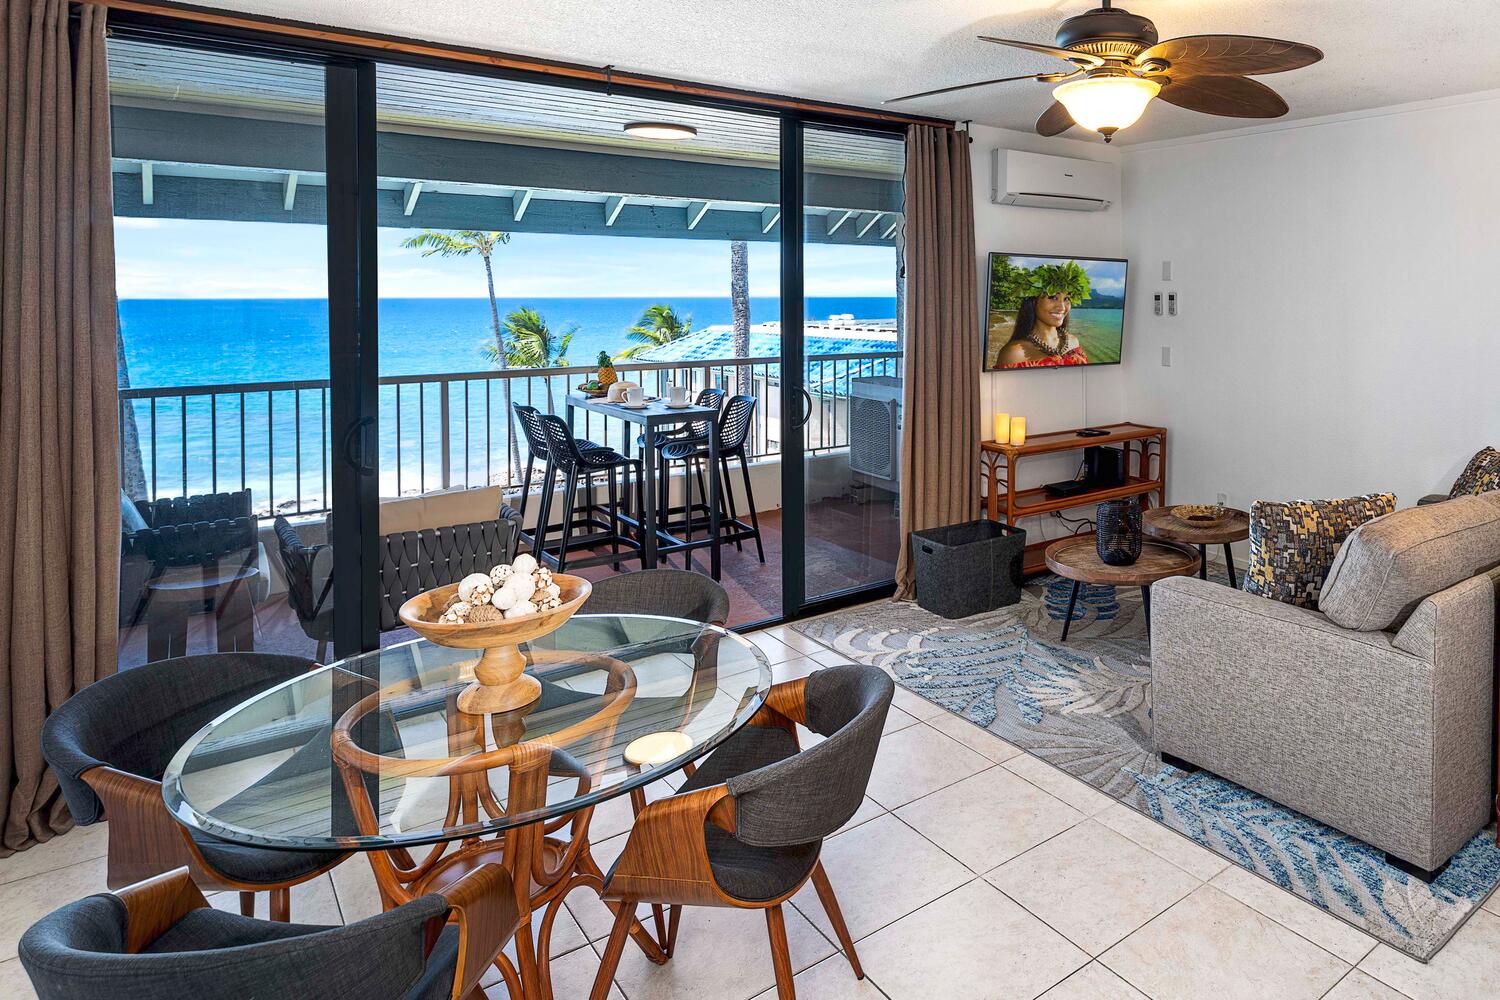 Kailua Kona Vacation Rentals, Kona Reef F23 - A cozy living space with AC, fan and natural lighting.